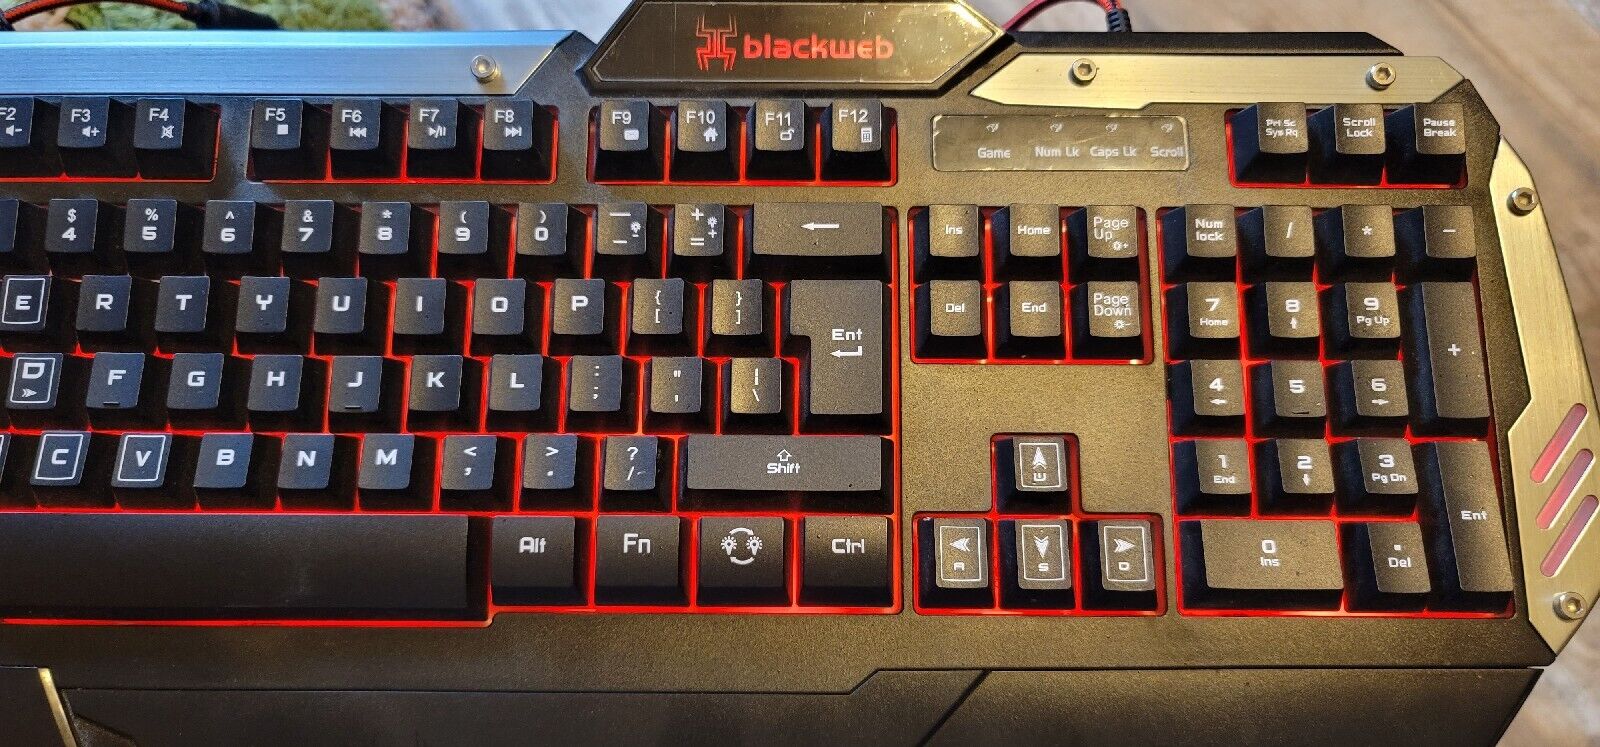 blackweb-centaur-gaming-keyboard-how-to-change-the-color-of-the-lights